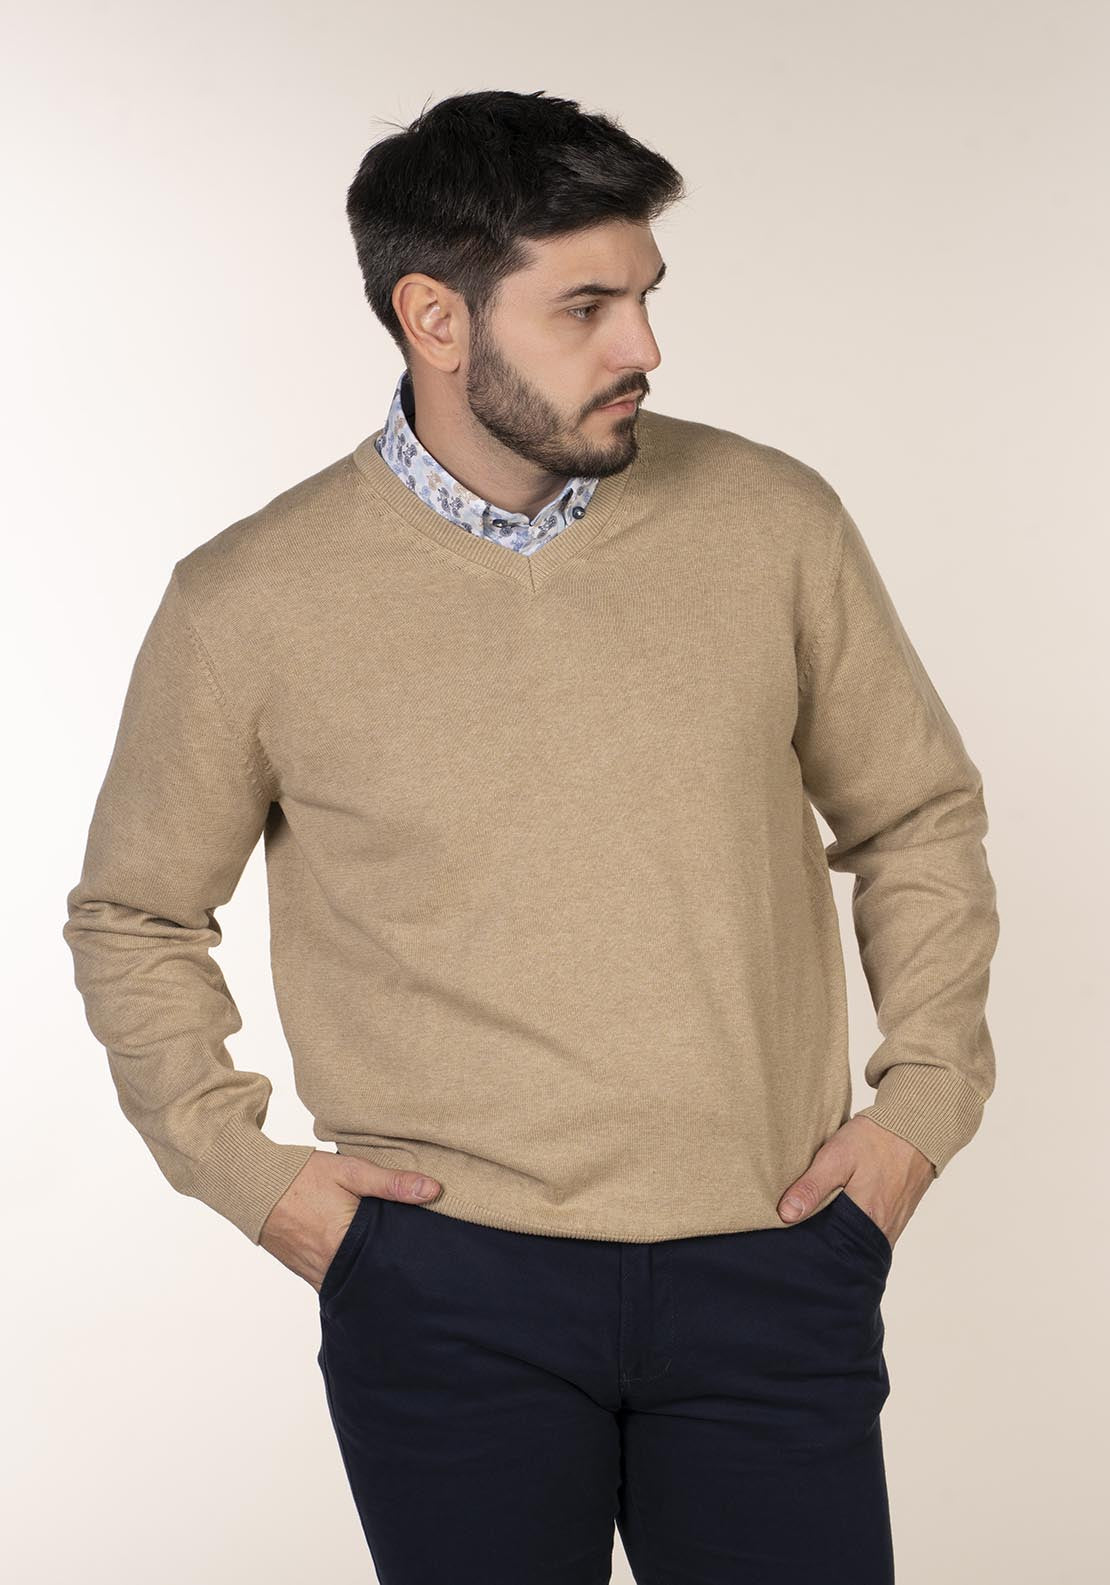 Yeats Plain Cotton V Neck Sweaters - Beige 4 Shaws Department Stores